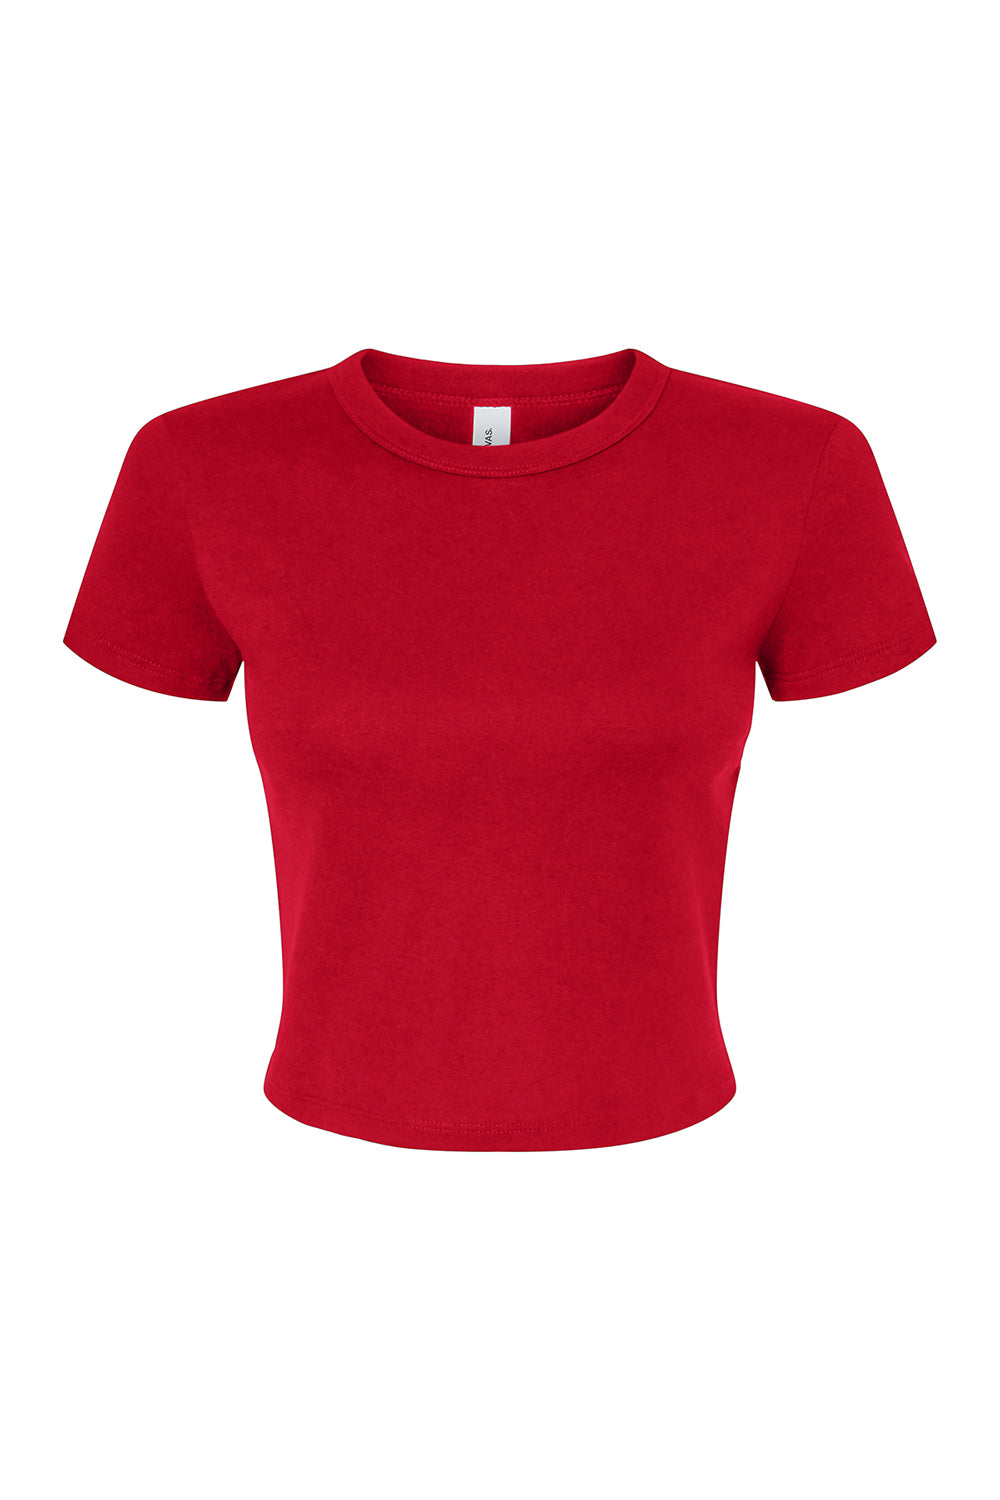 Bella + Canvas 1010BE Womens Micro Ribbed Short Sleeve Crewneck Baby T-Shirt Red Flat Front